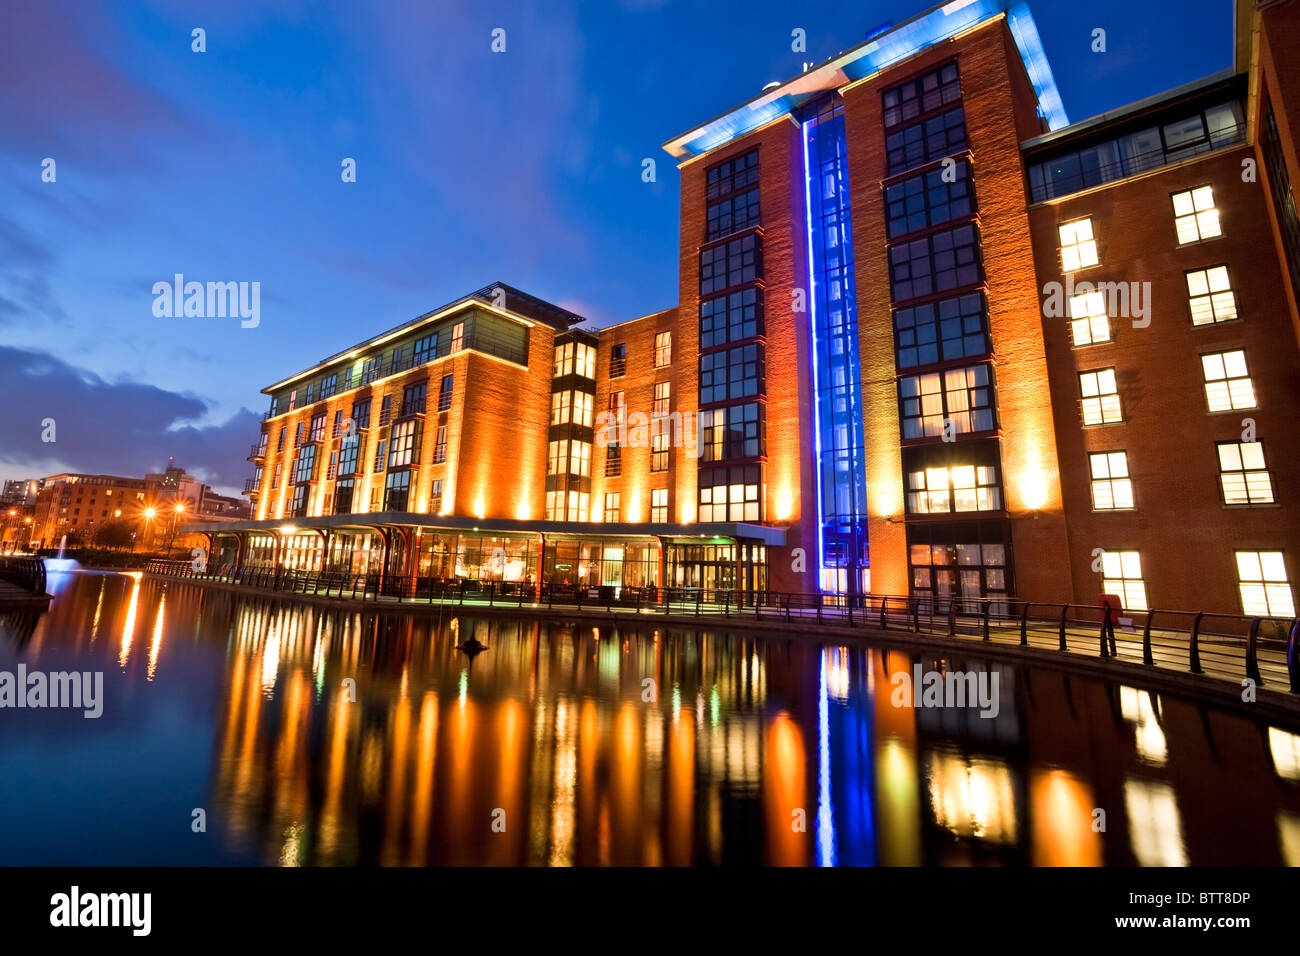 The Radisson Blu Hotel built on the site of the municipal gasworks, Beflast, Northern Ireland Stock Photo